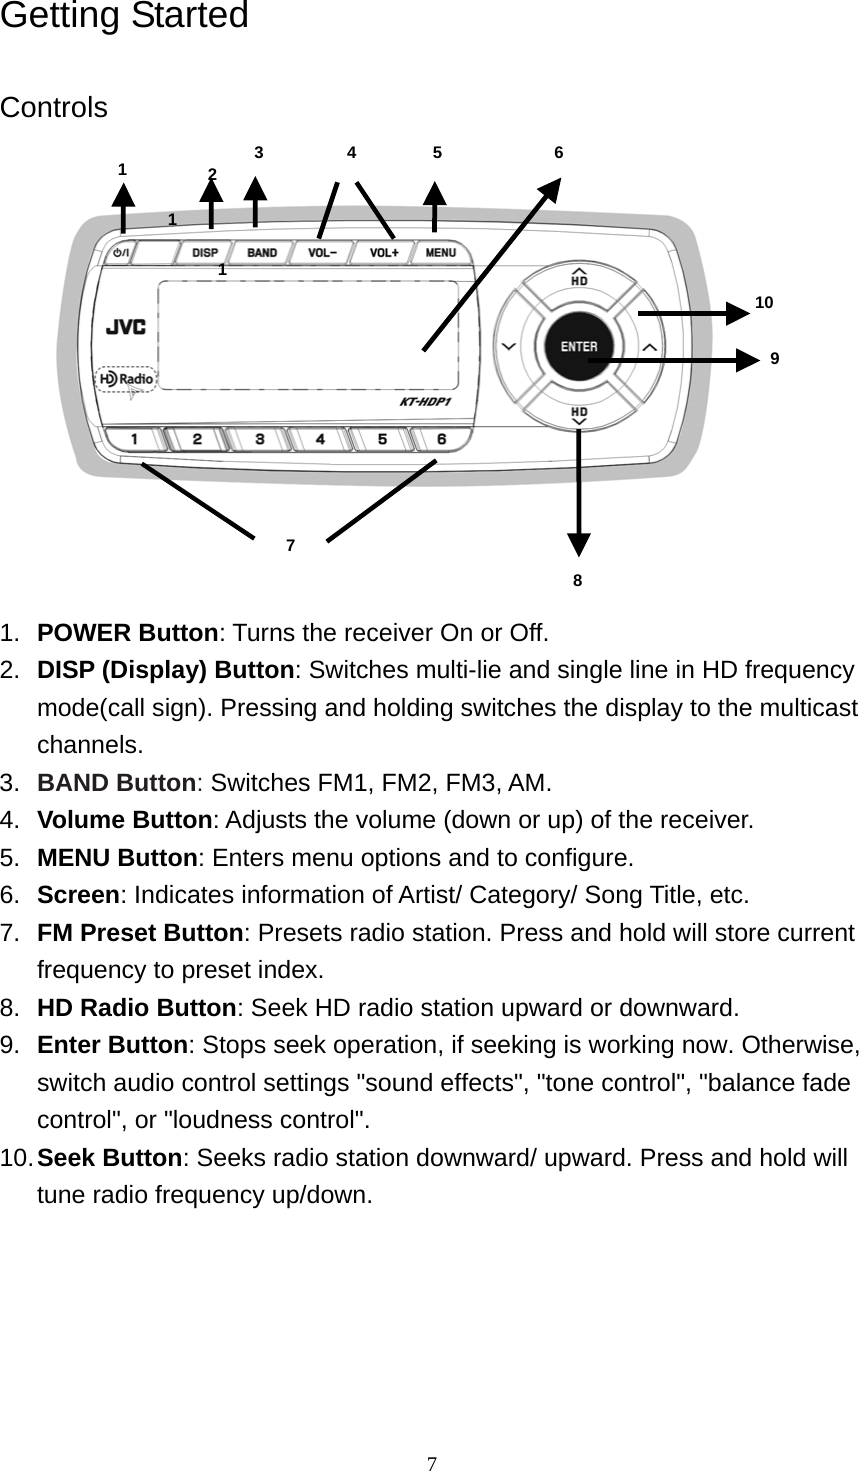  7Getting Started  Controls   1 7 12 1 3 4 5 69 810  1.  POWER Button: Turns the receiver On or Off. 2.  DISP (Display) Button: Switches multi-lie and single line in HD frequency mode(call sign). Pressing and holding switches the display to the multicast channels. 3.  BAND Button: Switches FM1, FM2, FM3, AM. 4.  Volume Button: Adjusts the volume (down or up) of the receiver. 5.  MENU Button: Enters menu options and to configure. 6.  Screen: Indicates information of Artist/ Category/ Song Title, etc. 7.  FM Preset Button: Presets radio station. Press and hold will store current frequency to preset index. 8.  HD Radio Button: Seek HD radio station upward or downward. 9.  Enter Button: Stops seek operation, if seeking is working now. Otherwise, switch audio control settings &quot;sound effects&quot;, &quot;tone control&quot;, &quot;balance fade control&quot;, or &quot;loudness control&quot;. 10. Seek Button: Seeks radio station downward/ upward. Press and hold will tune radio frequency up/down.  